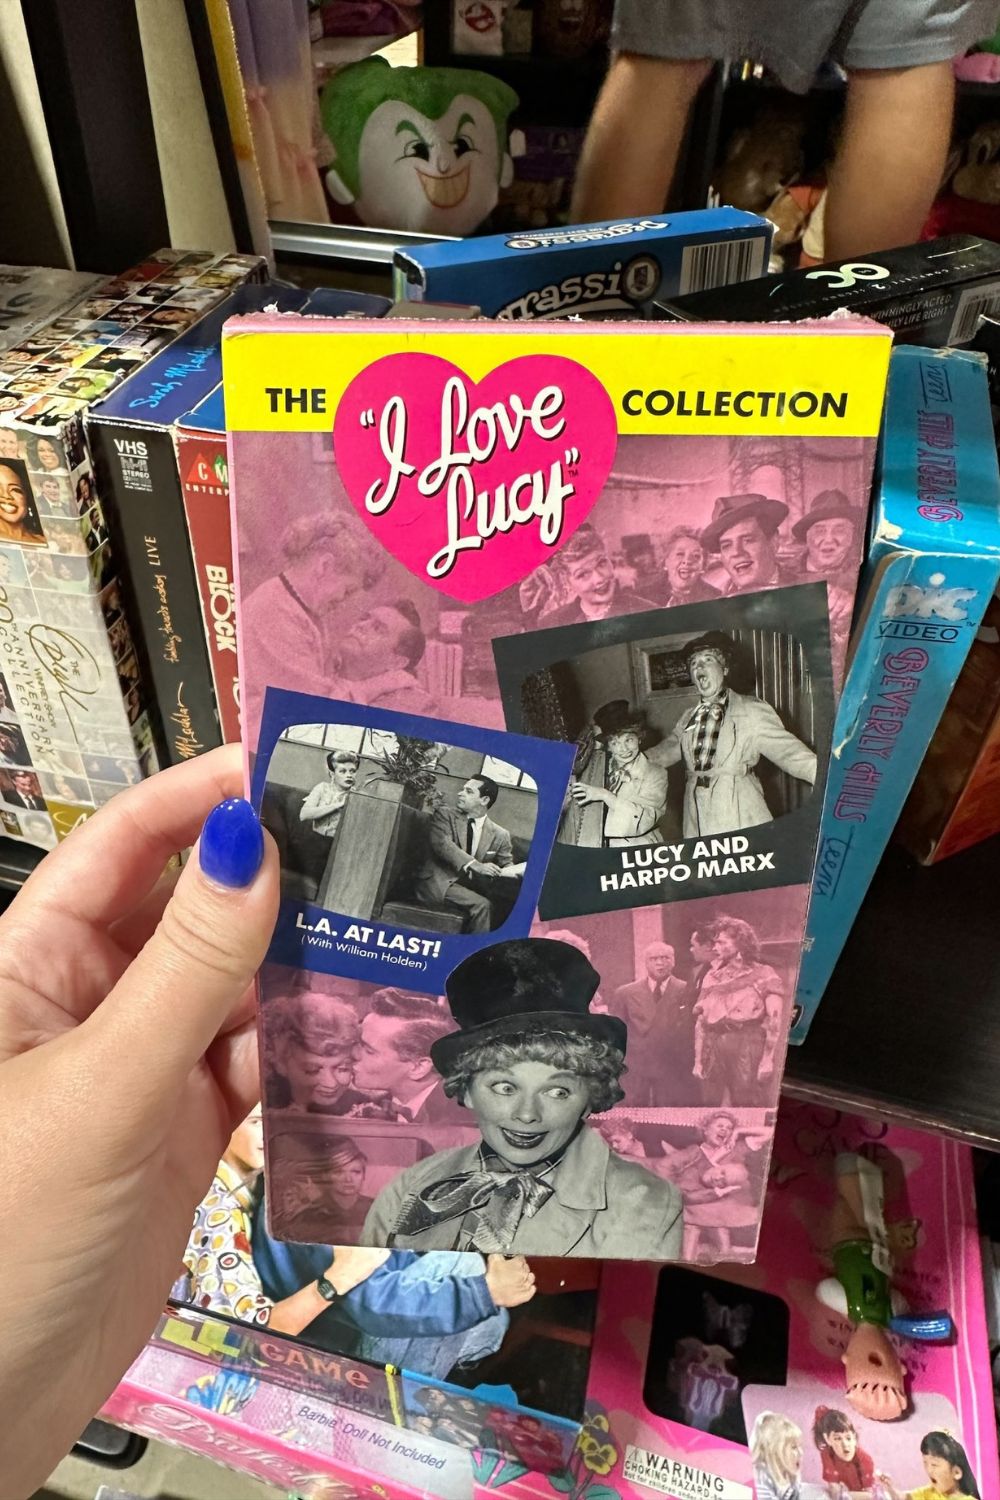 I LOVE LUCY VHS*